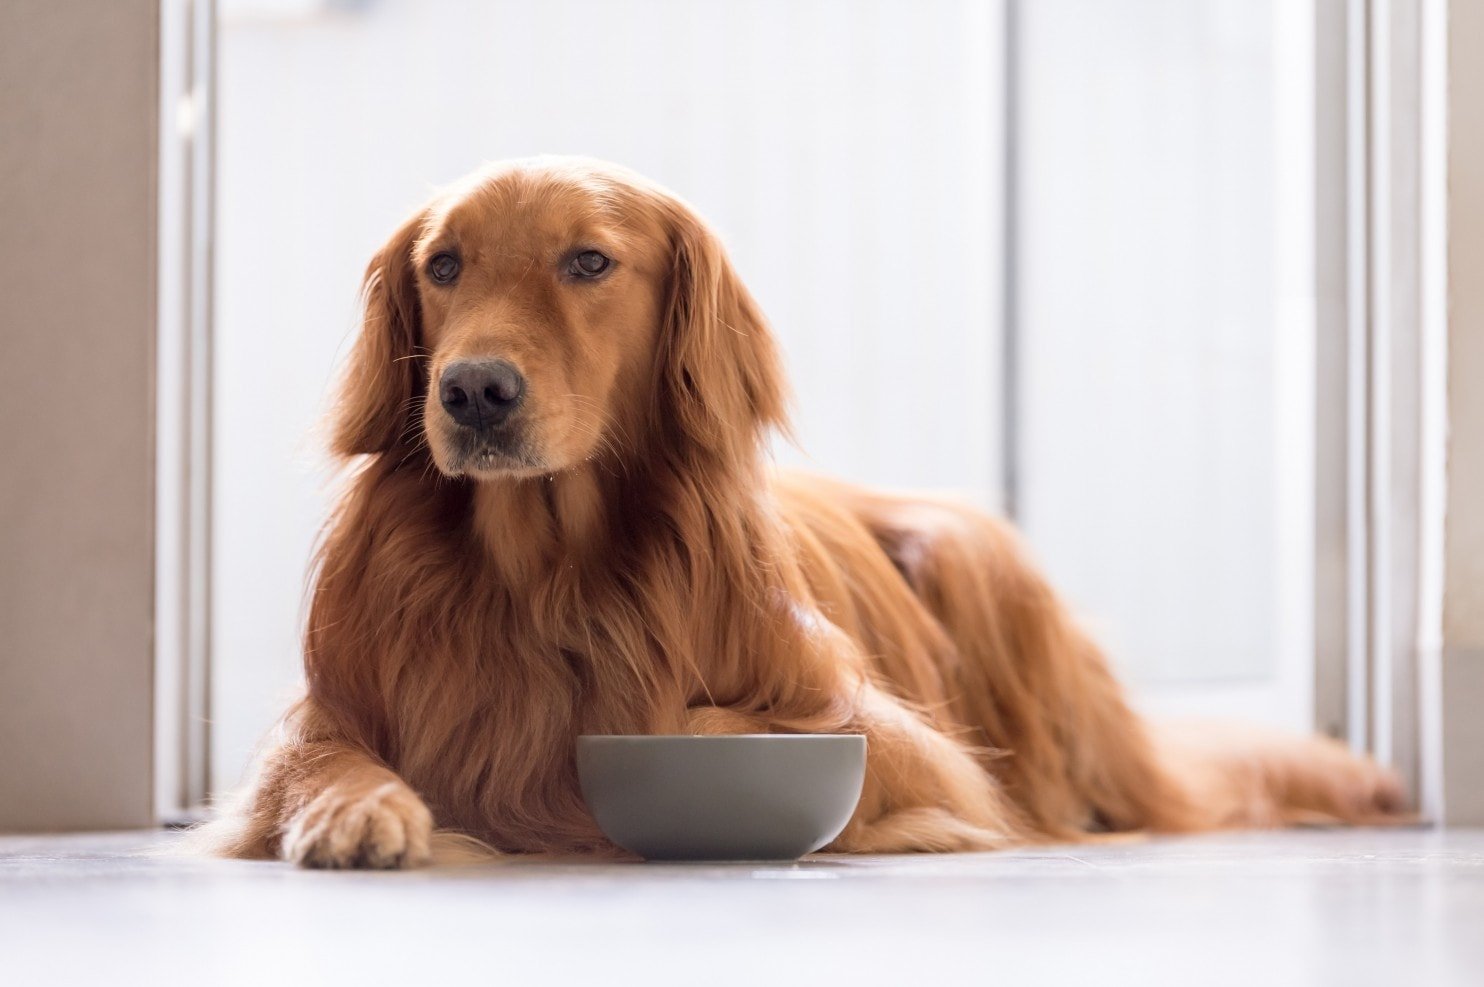 Golden retriever eats twice a day but remains thin